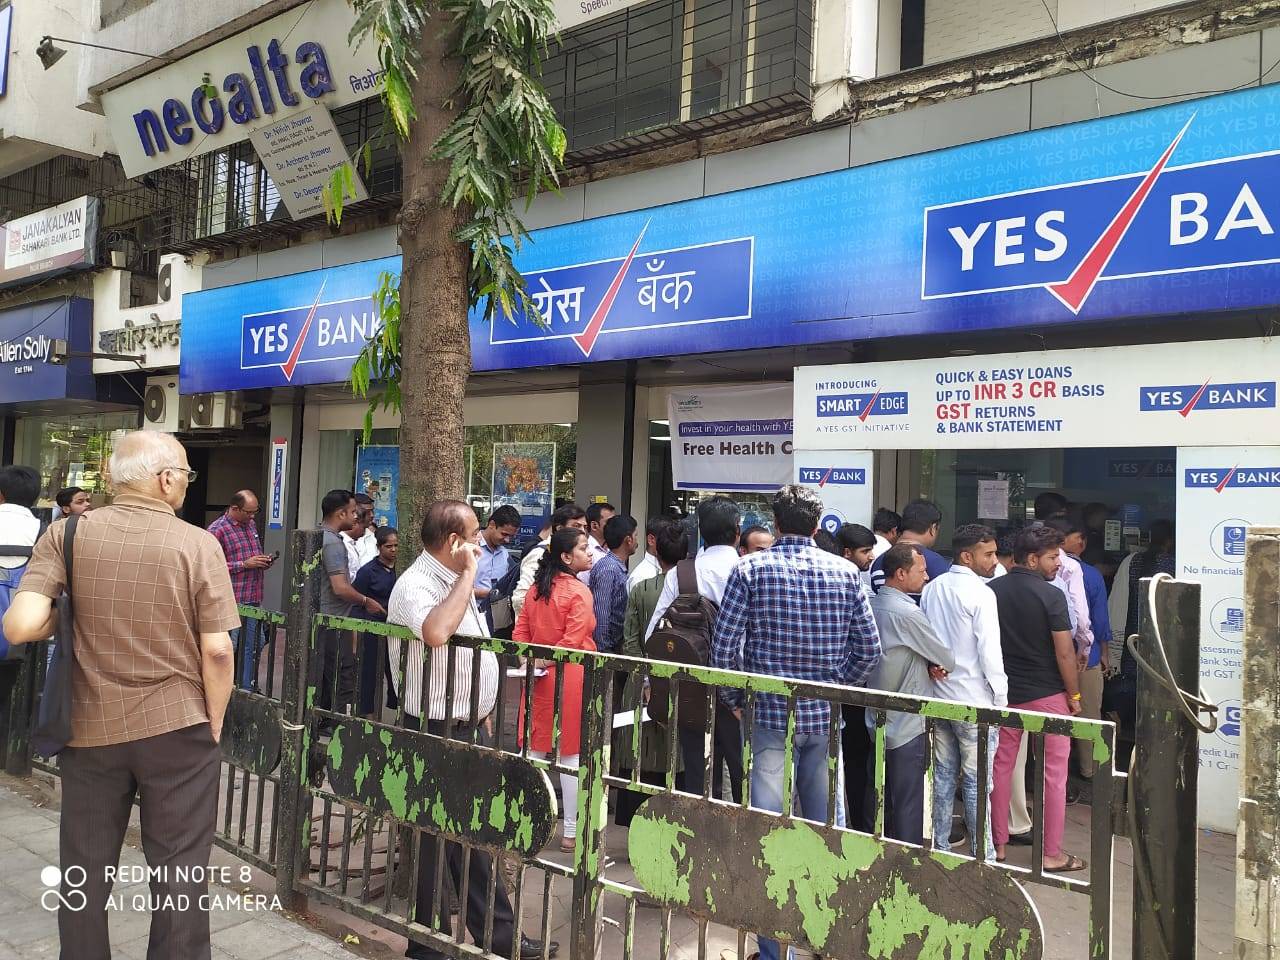 In pics: Customers of Yes Bank line up outside ATMs for cash